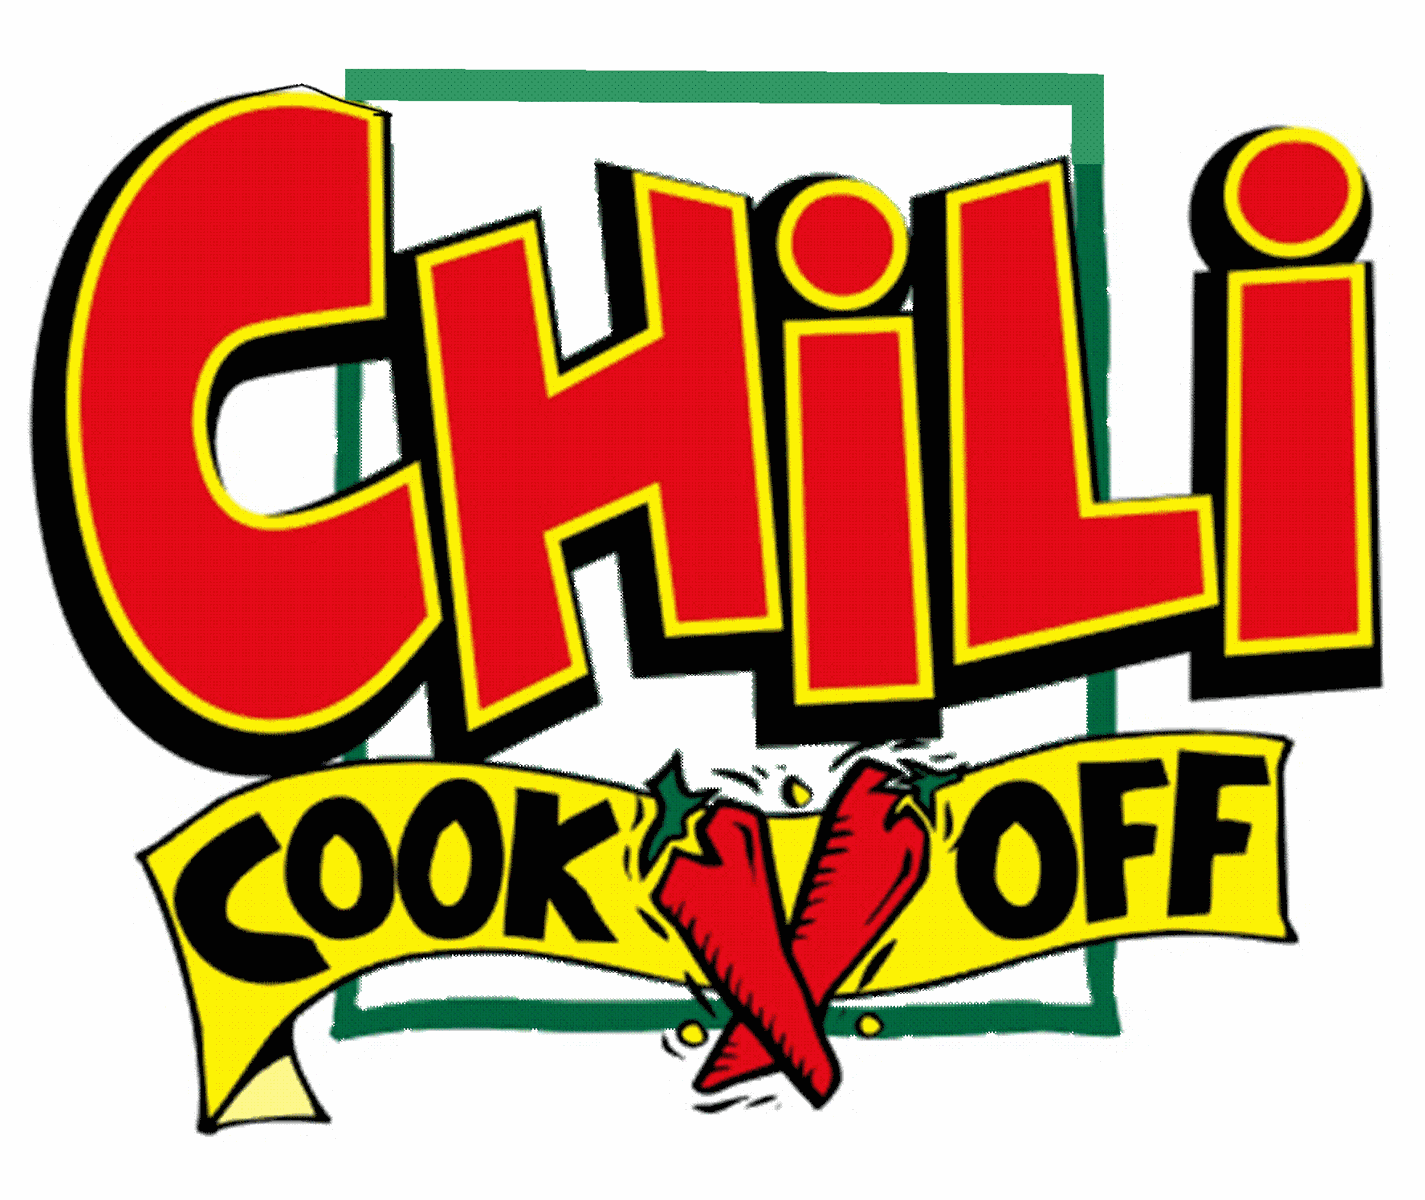 16 Chili Cookoff Clip Art Free Cliparts That You Can Download To You    